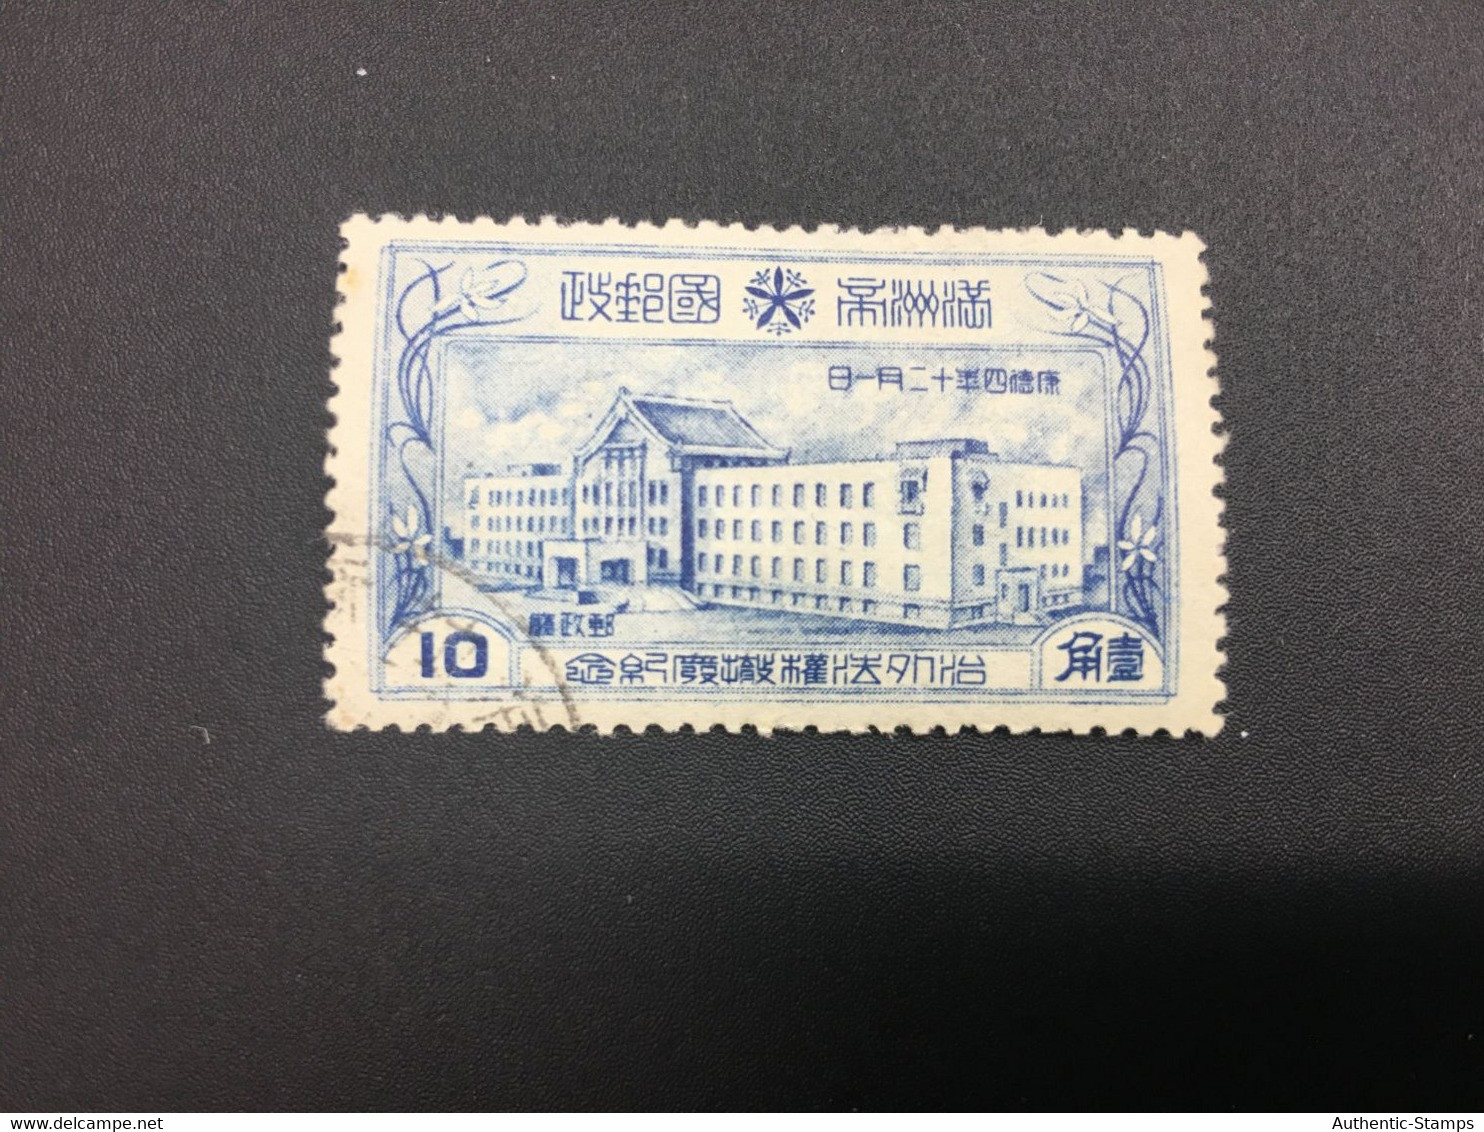 CHINA STAMP,  USED, TIMBRO, STEMPEL,  CINA, CHINE, LIST 7379 - 1932-45 Mandchourie (Mandchoukouo)